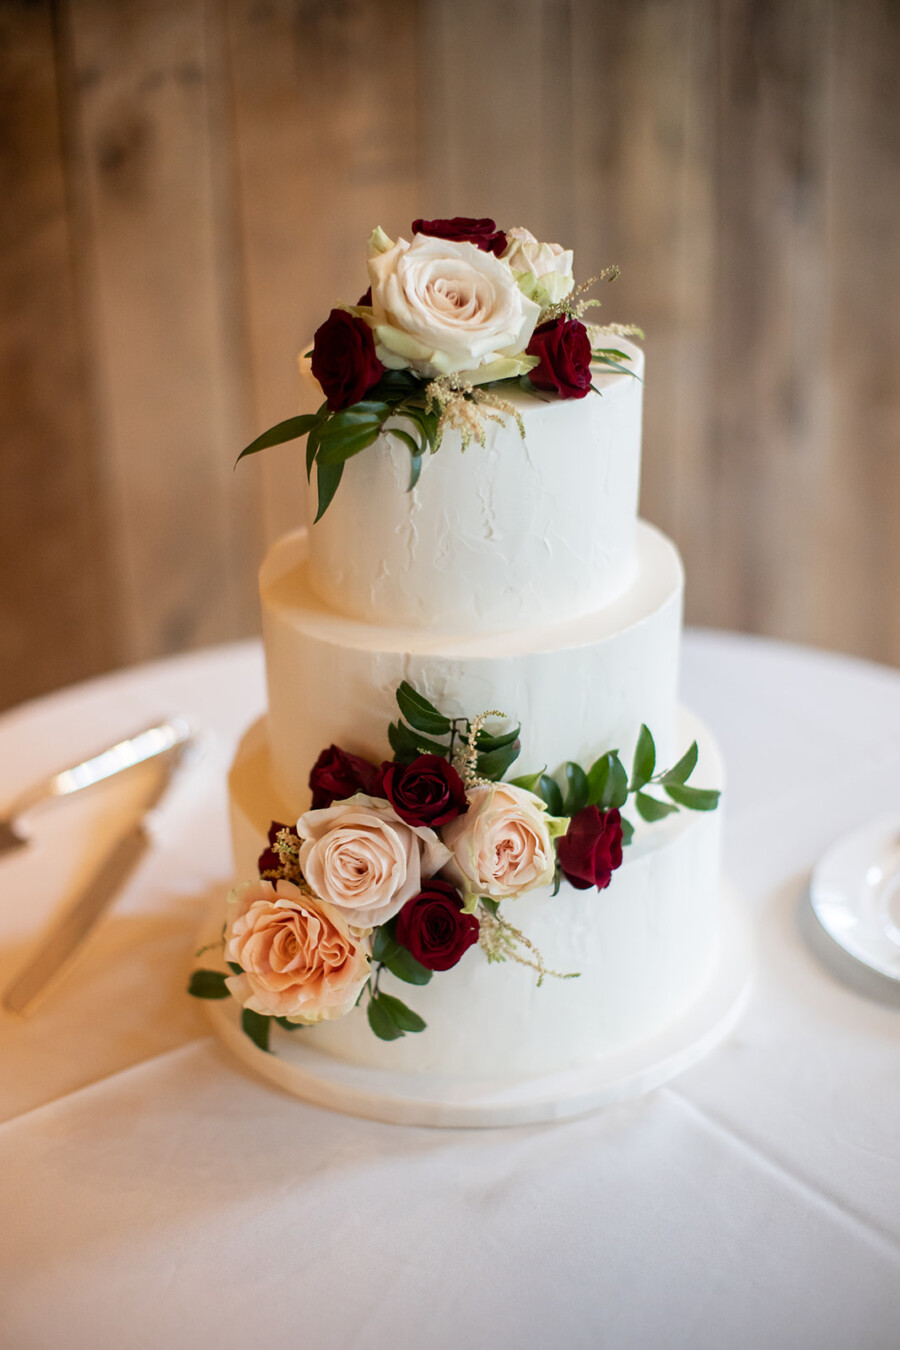 White wedding cake with red and pink flowers